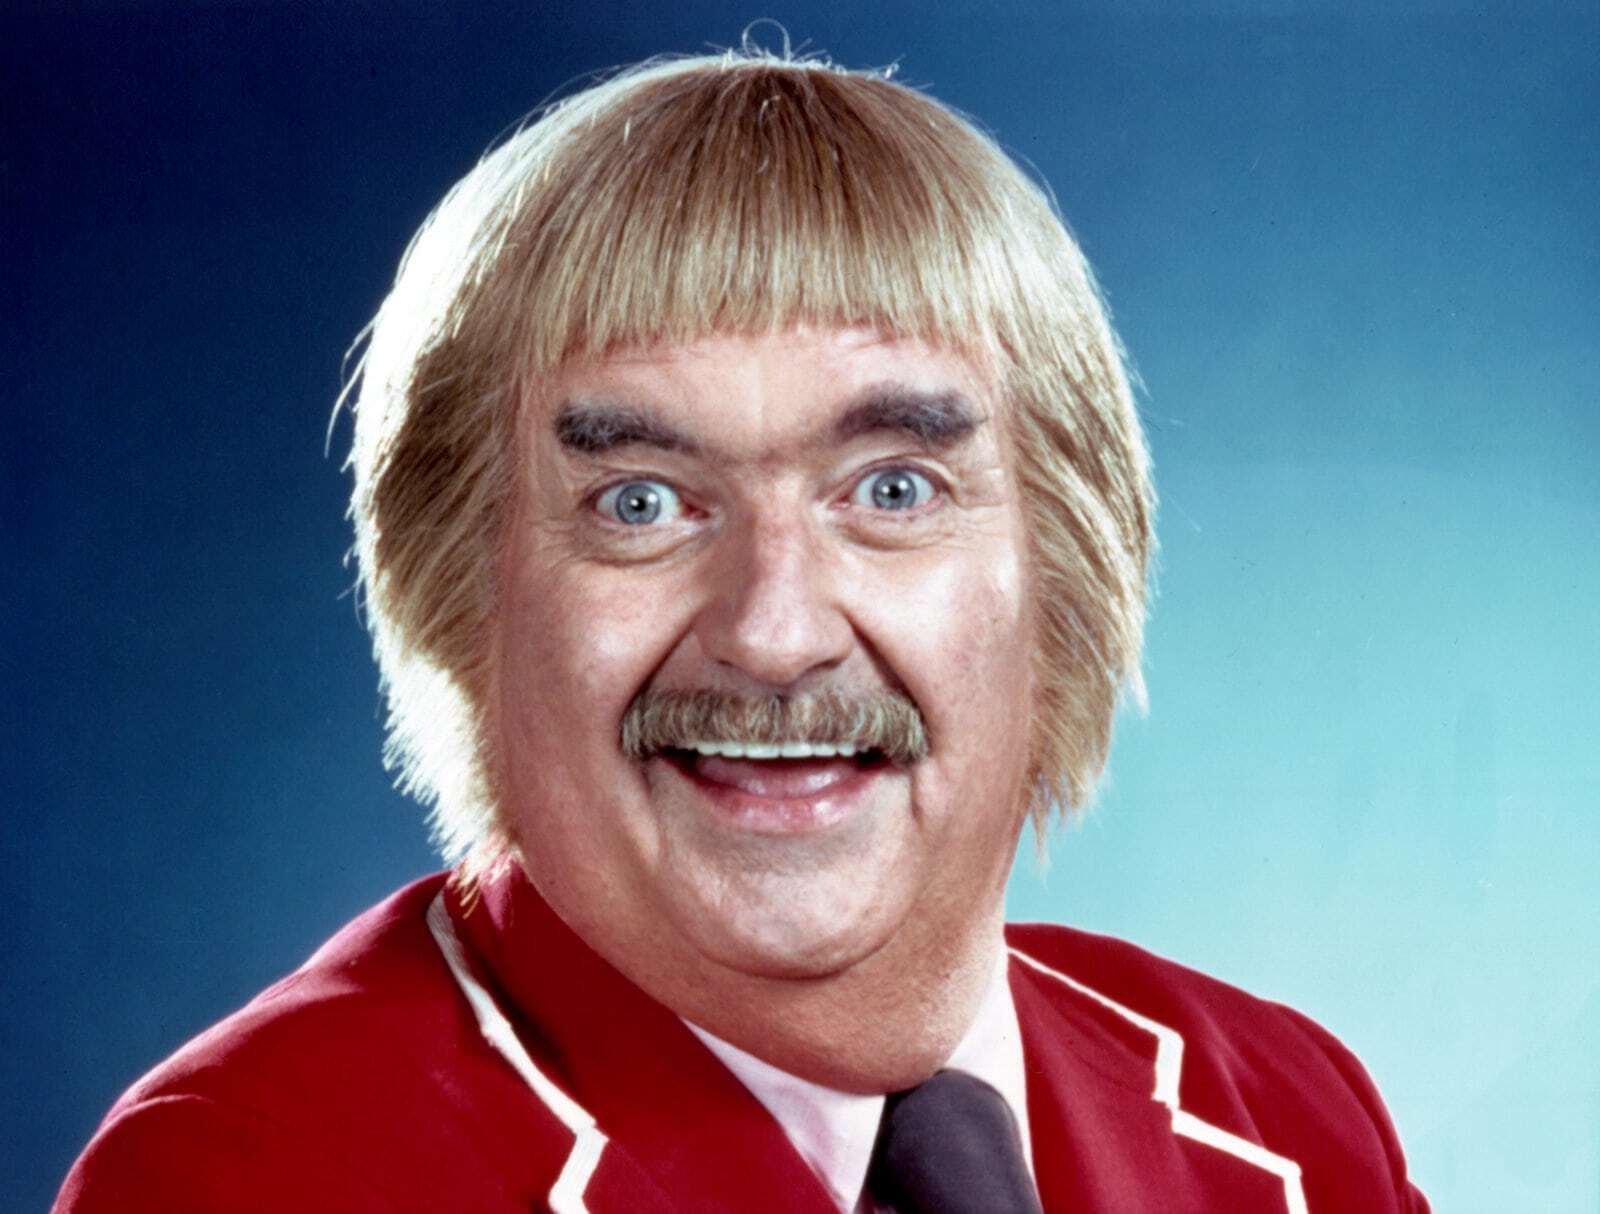 “The guy who played Captain Kangaroo came into a restaurant I worked at in college. I asked if he was Captain Kangaroo and he said, ‘No, but I am a friend of his, and he said I might run into you!’ He winked and walked away.”